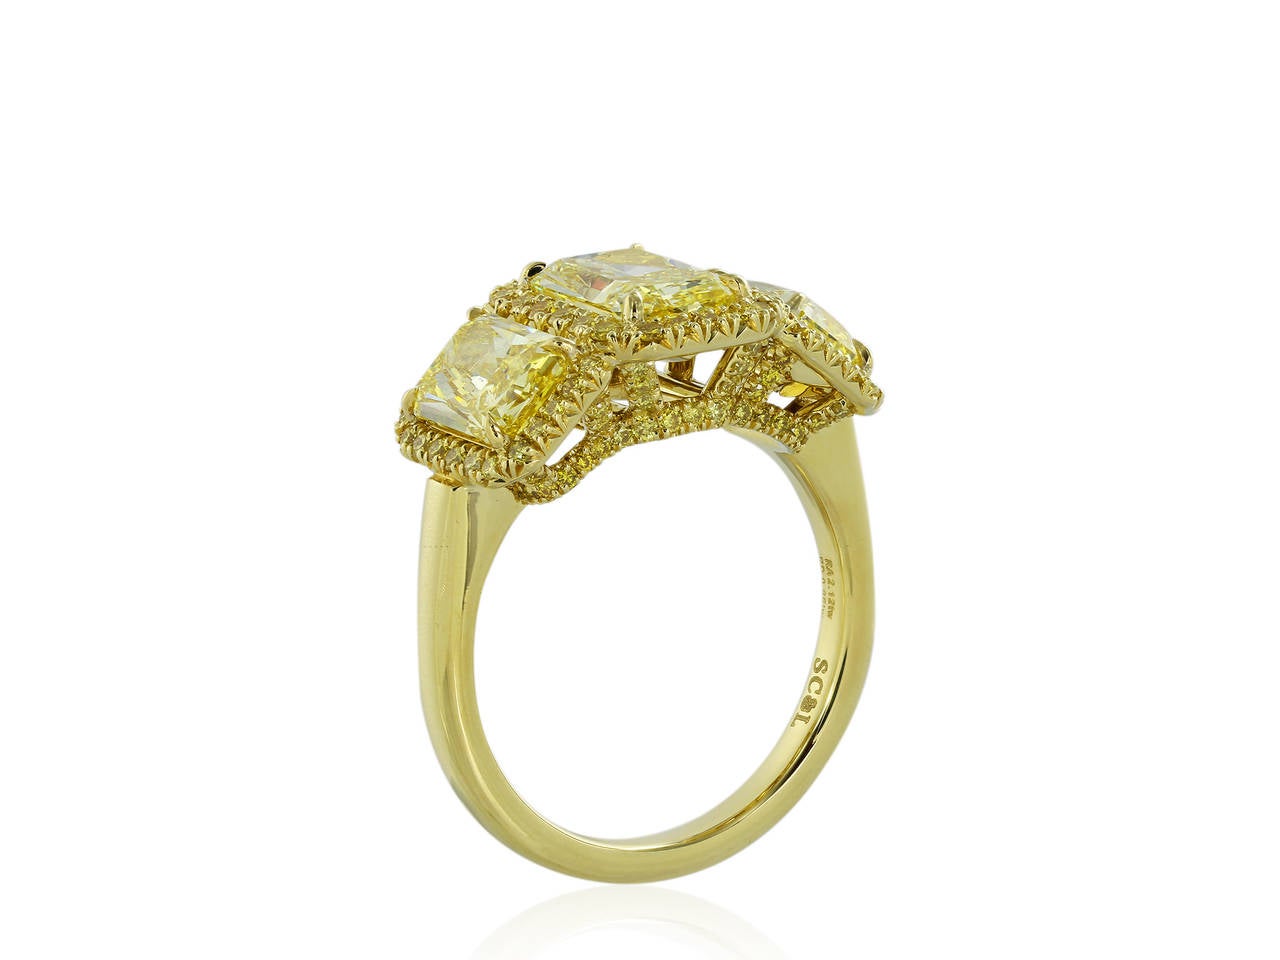 Custom made, 18 karat yellow gold three stone engagement ring consisting of one radiant cut canary diamond weighing 1.41 carats, measuring 8.16 x 5.80 x 3.55 mm, having a color of Natural Fancy Intense Yellow/SI1 with GIA report number 2145324663